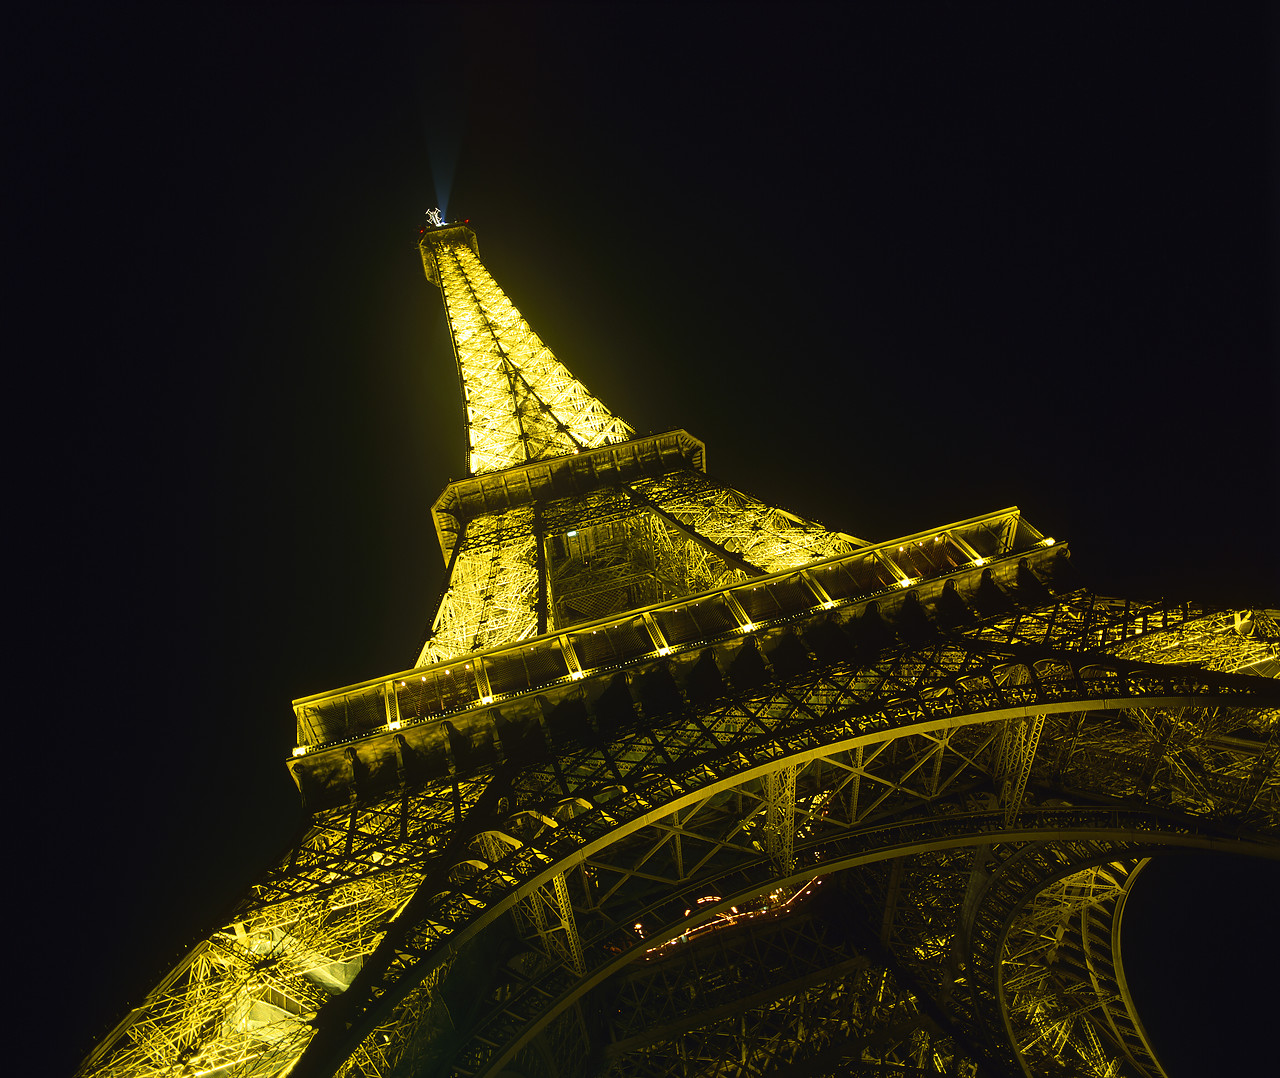 #010171-1 - The Eiffel Tower at Night, Paris, France